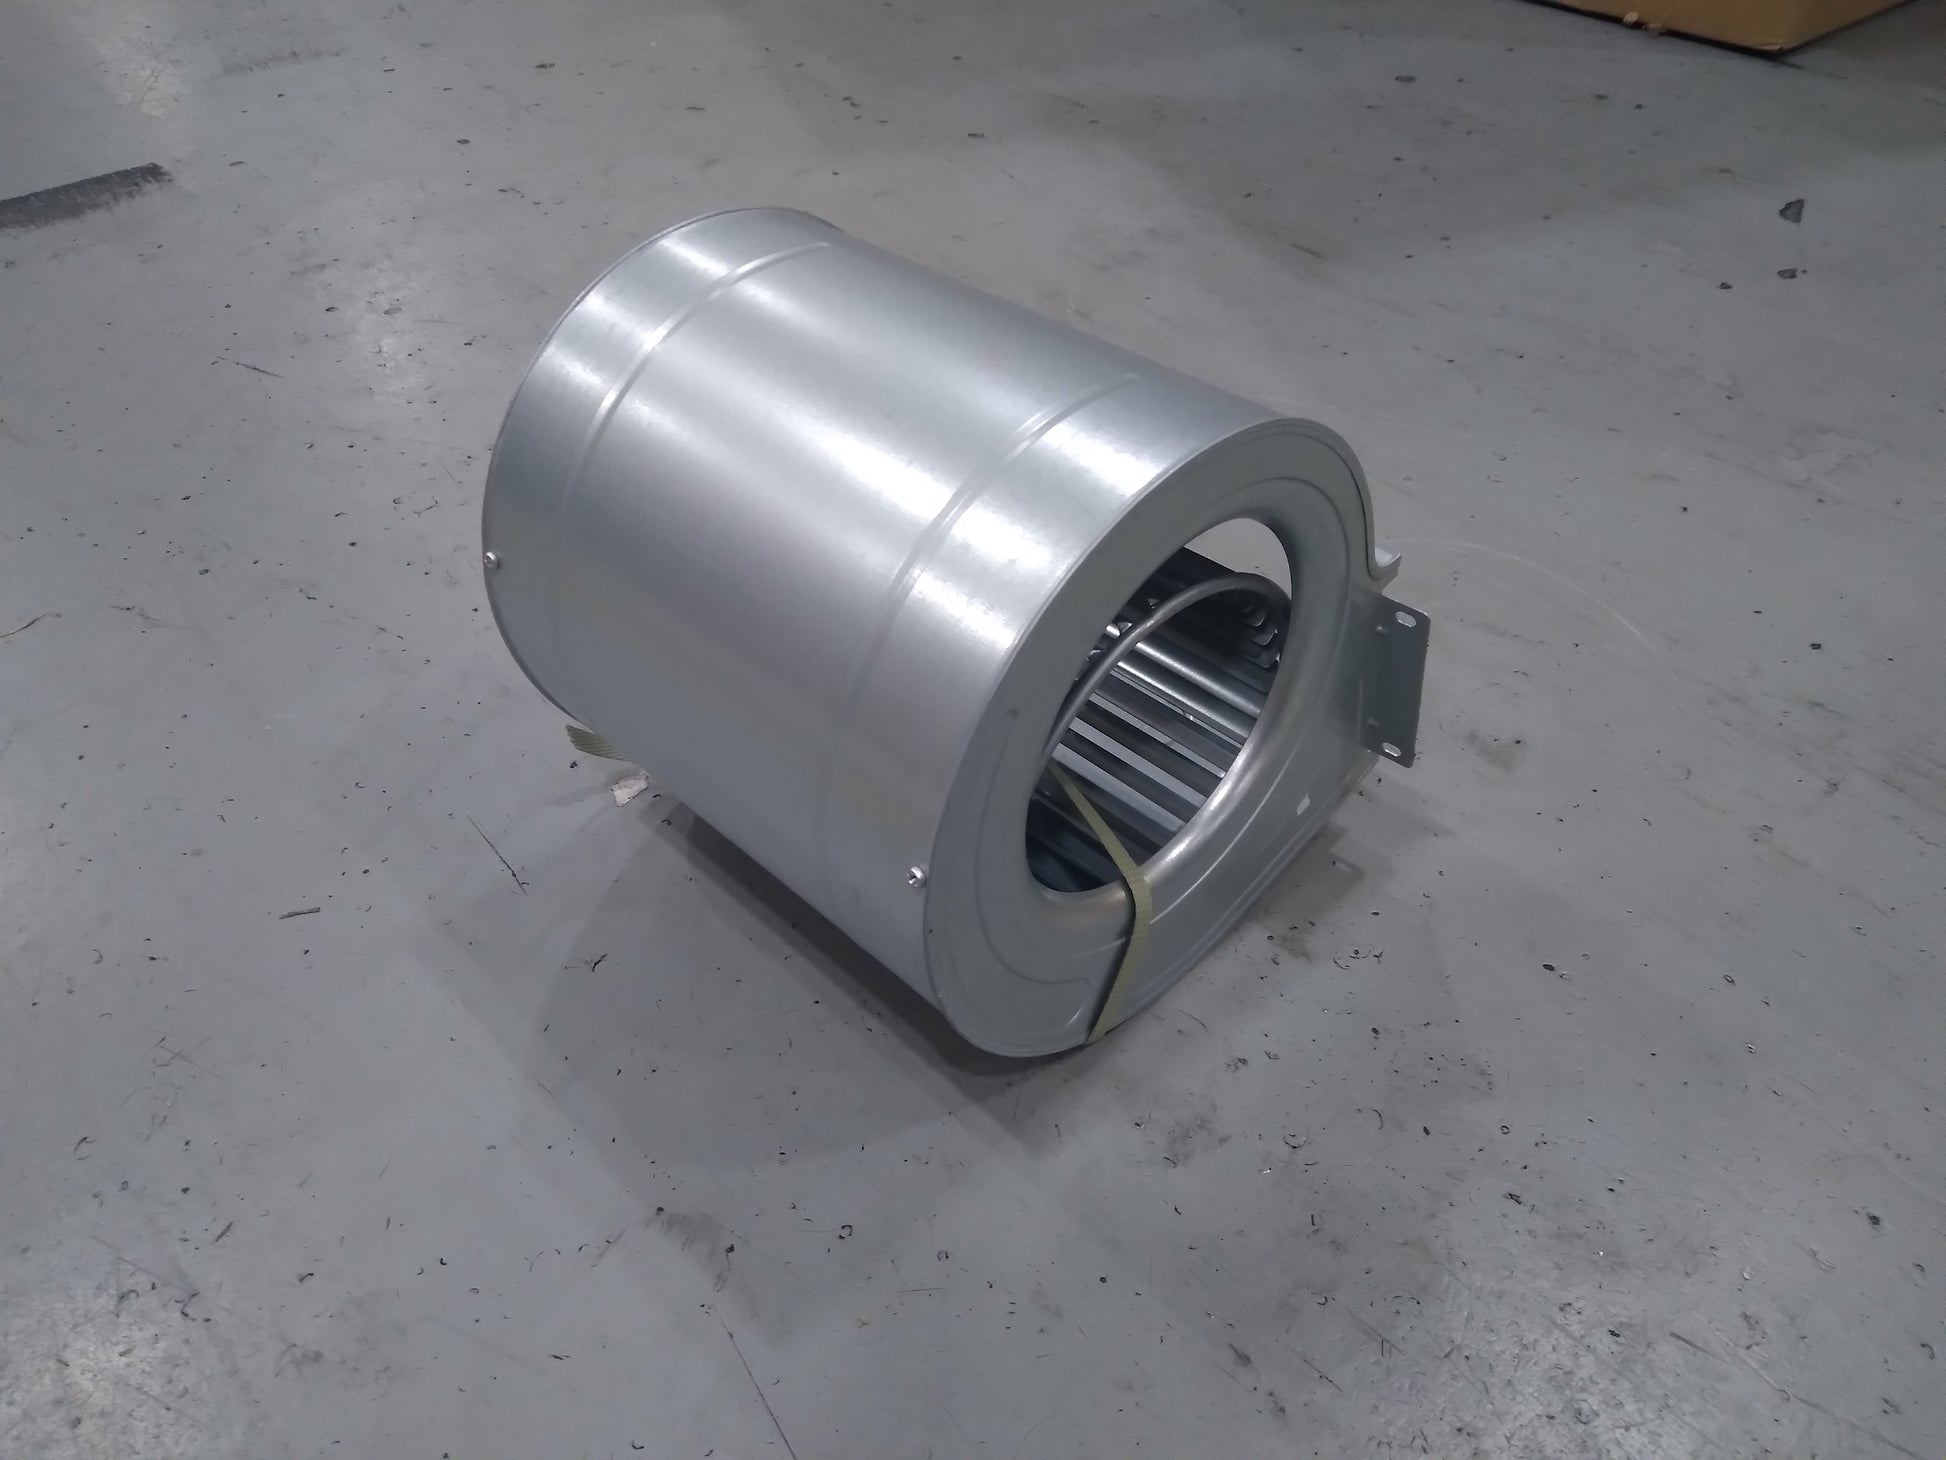 9" BLOWER HOUSING AND WHEEL ASSEMBLY, LESS MOTOR CCW ROTATION, CONCAVE ORIENTATION 1/2" BORE  